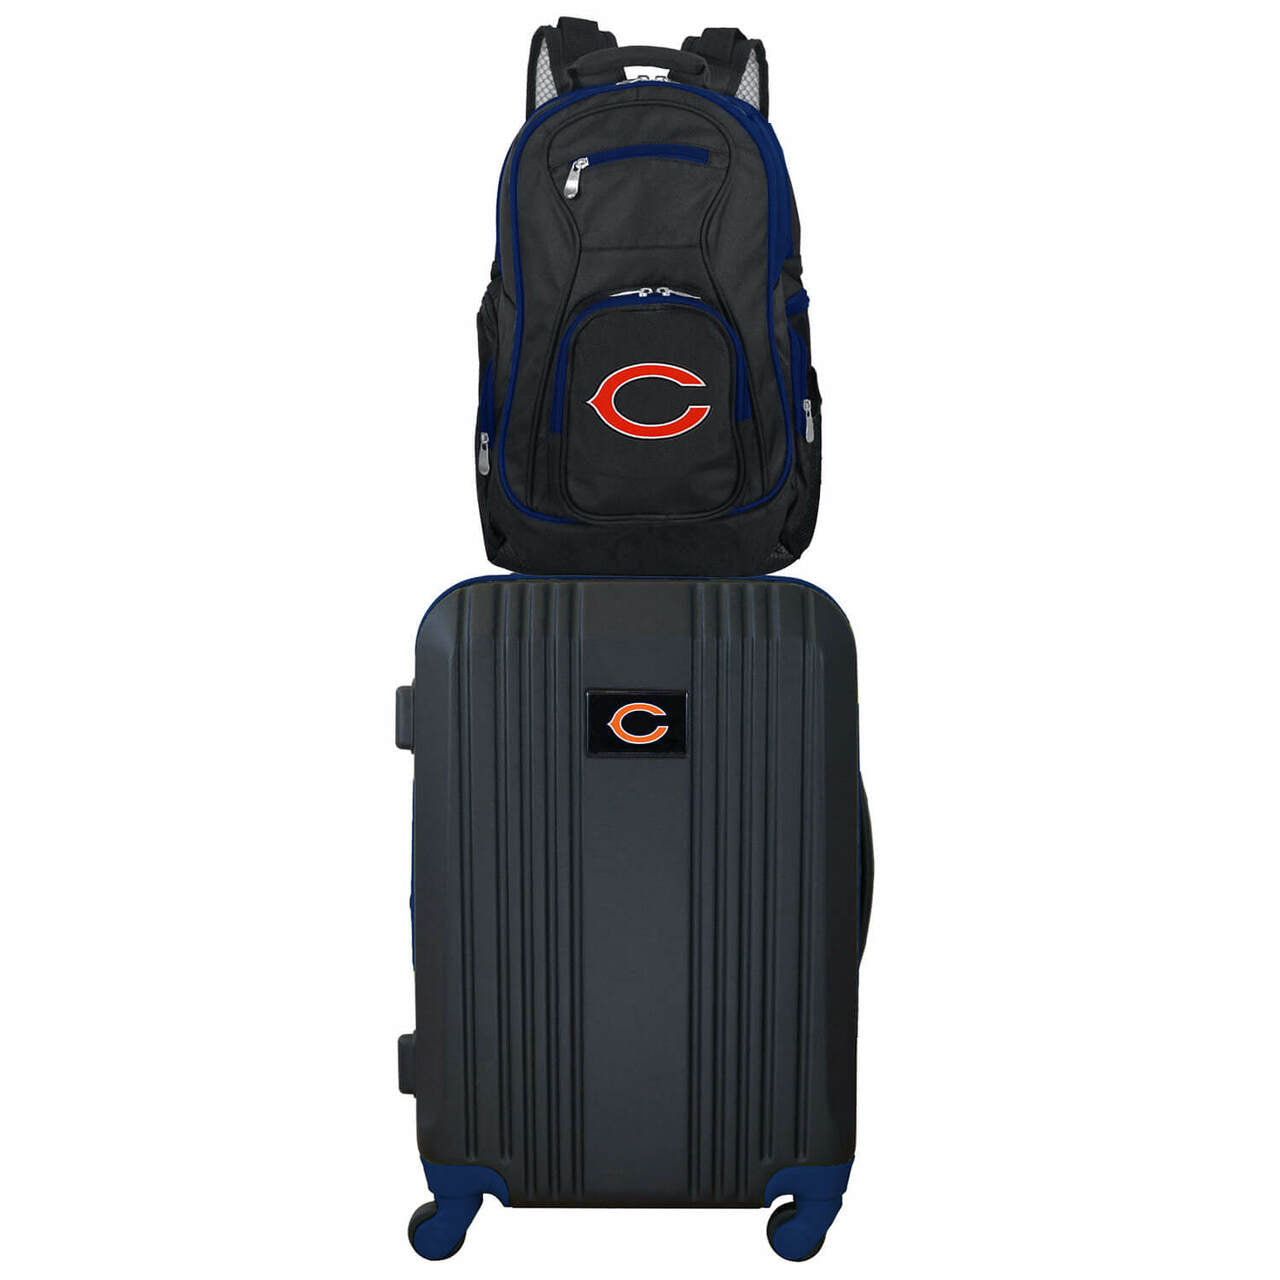 Chicago Bears 2 Piece Premium Colored Trim Backpack and Luggage Set